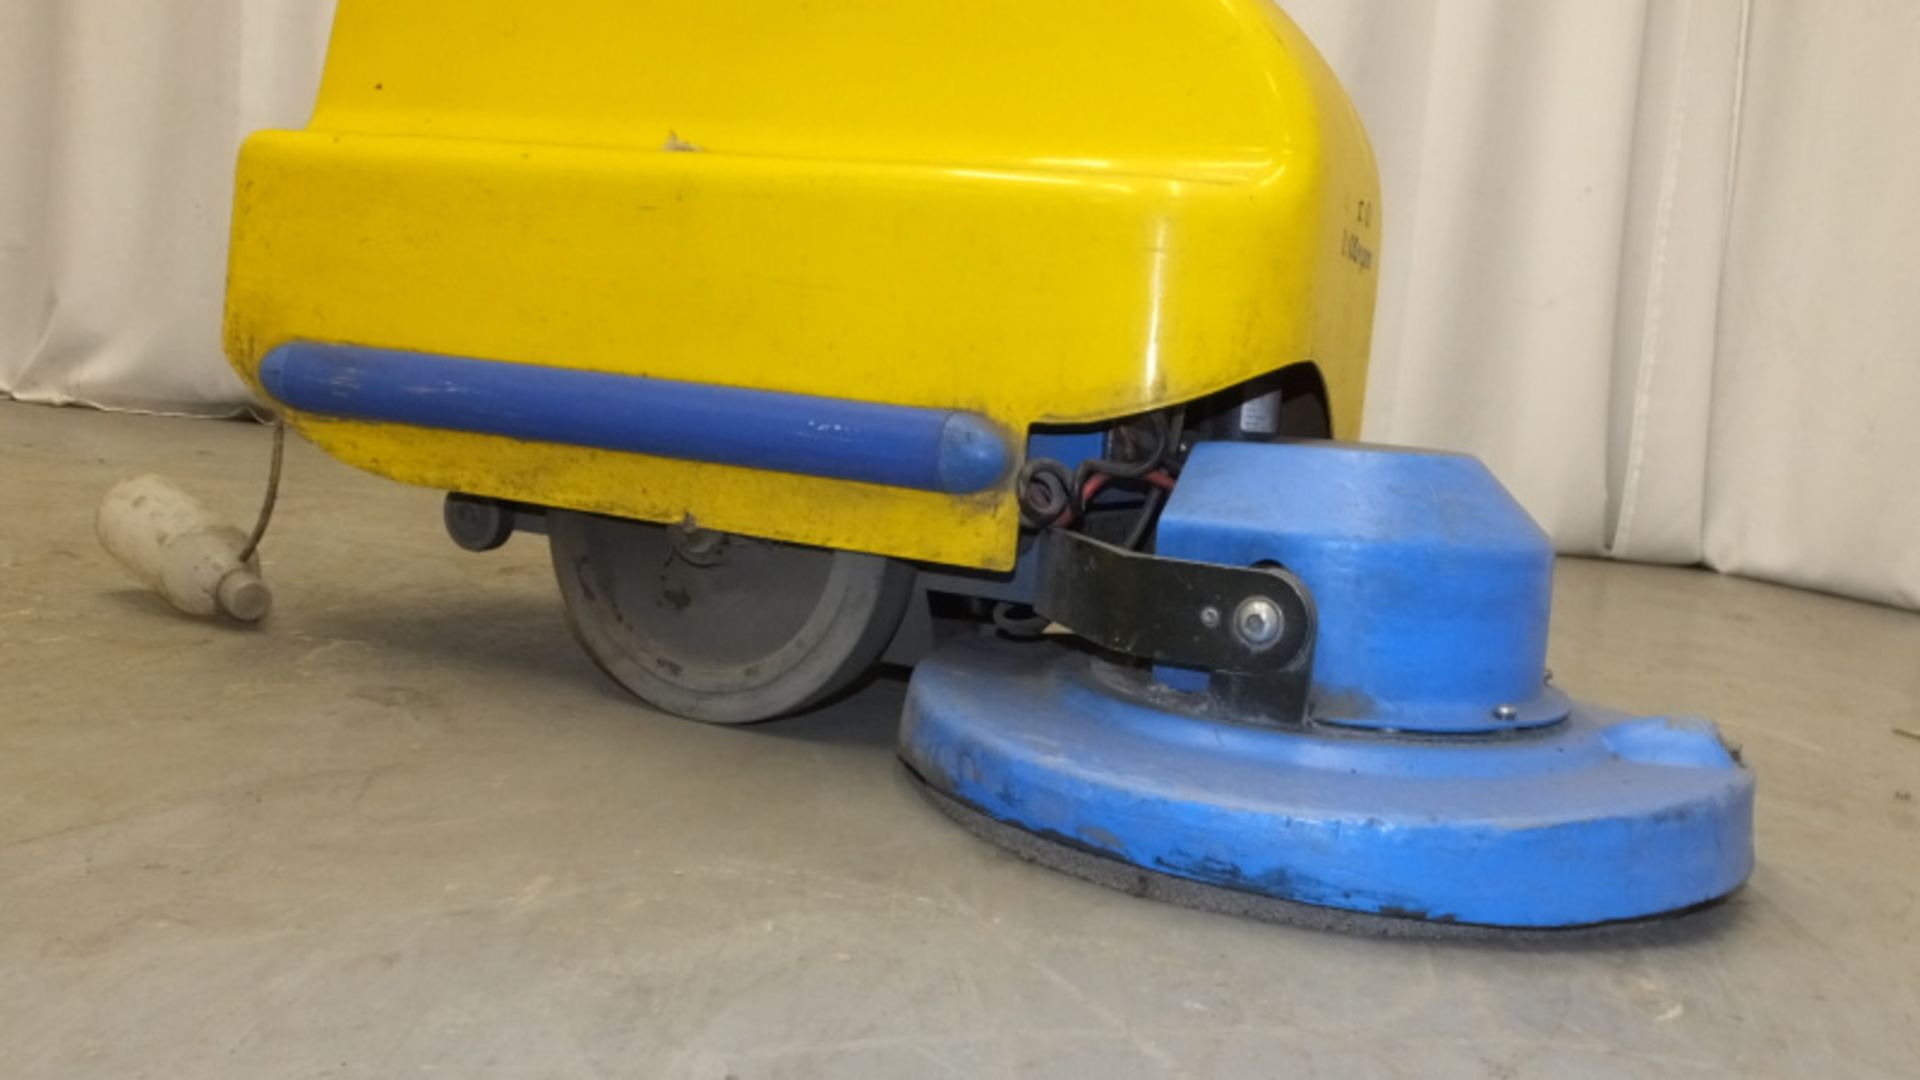 Tennant Challenger Zippy 430 Walk-Behind Floor Cleaner - has key but doesn't power up - cracked case - Image 2 of 8